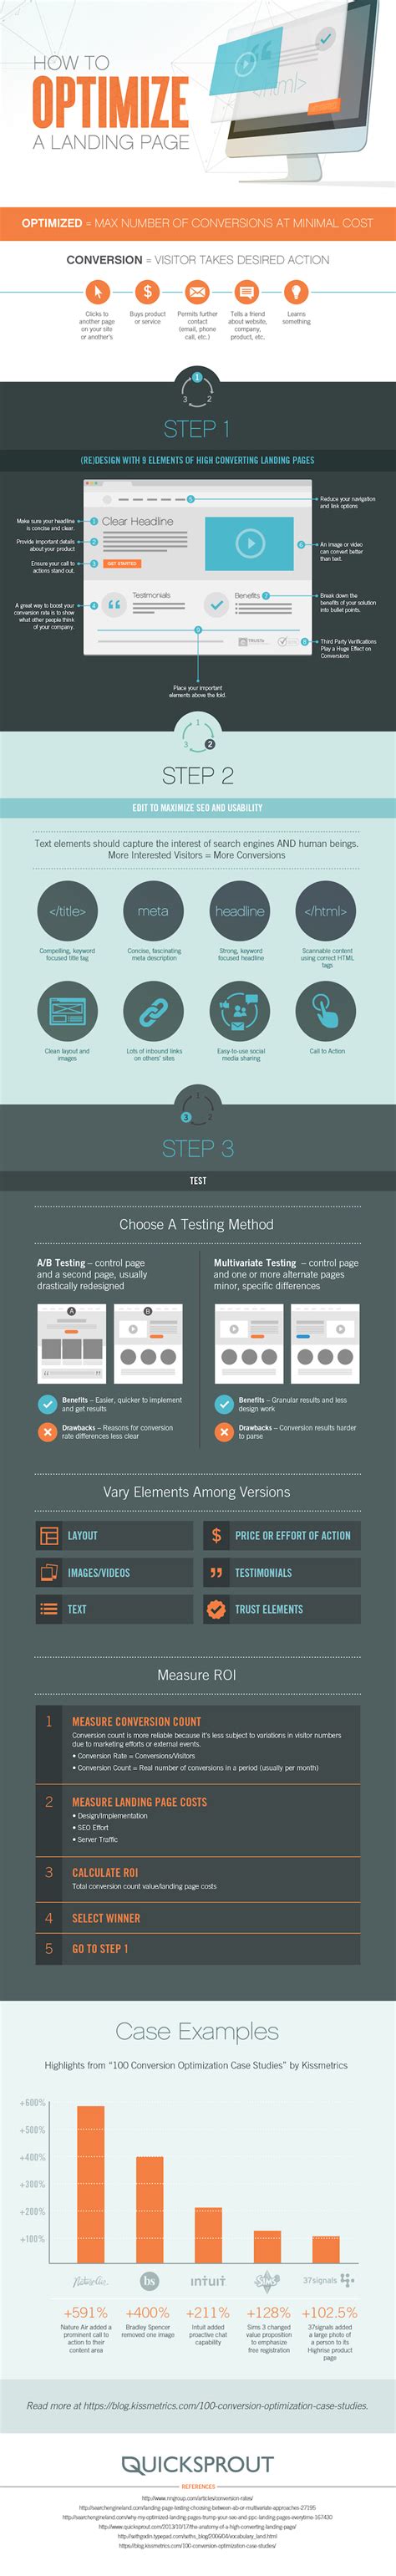 a simple guide to optimizing your landing pages [infographic]